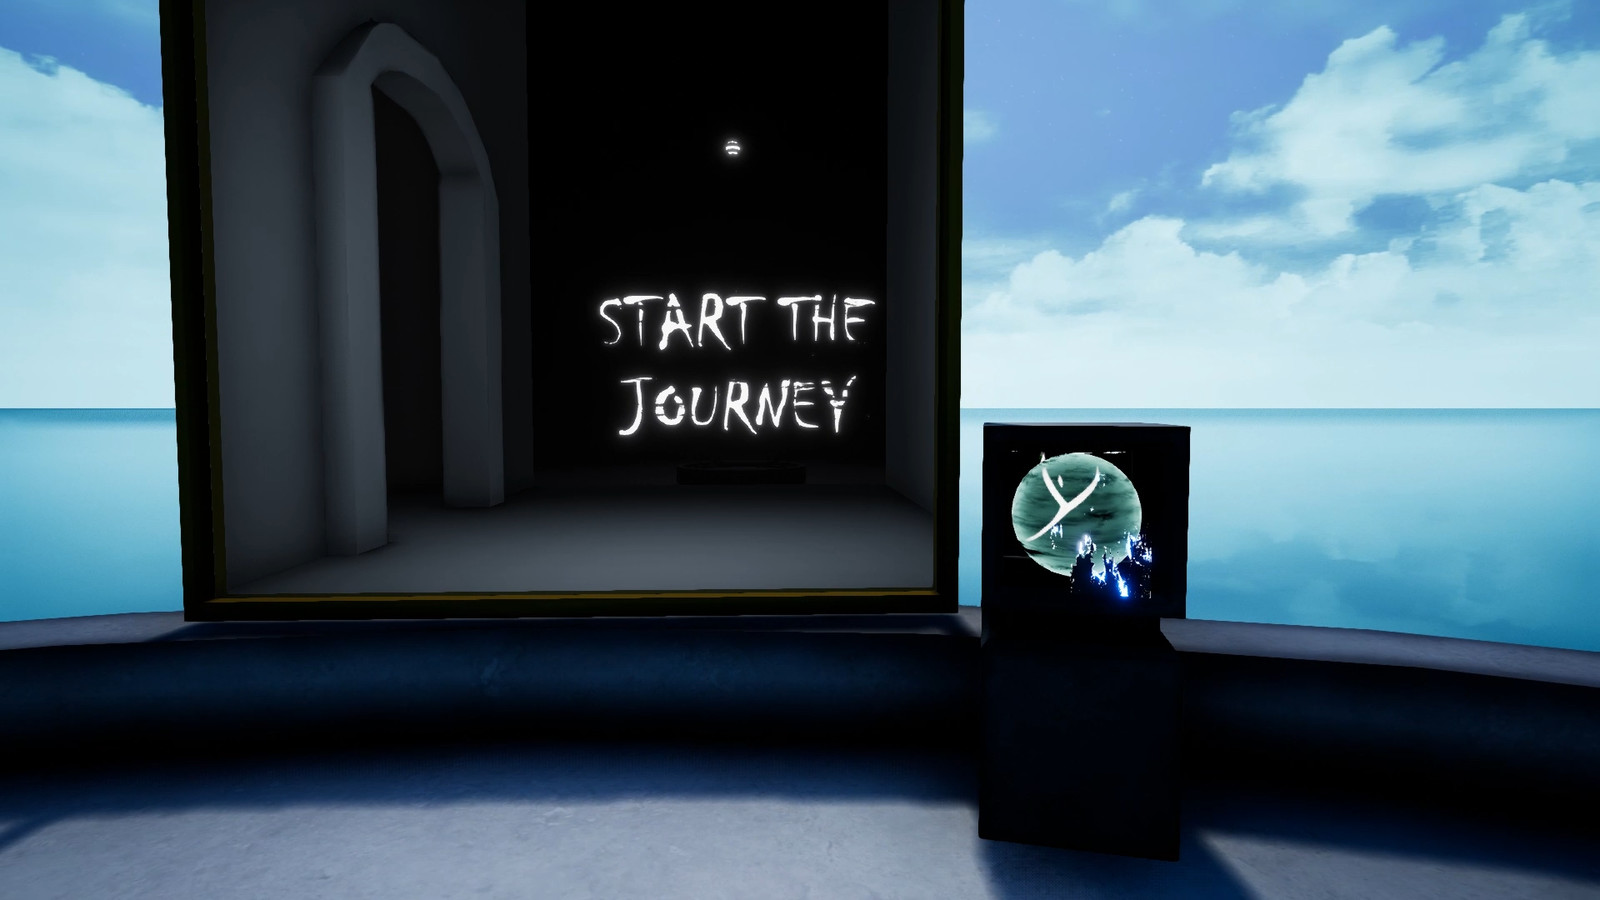 The game is about resolving puzzles using physical objects